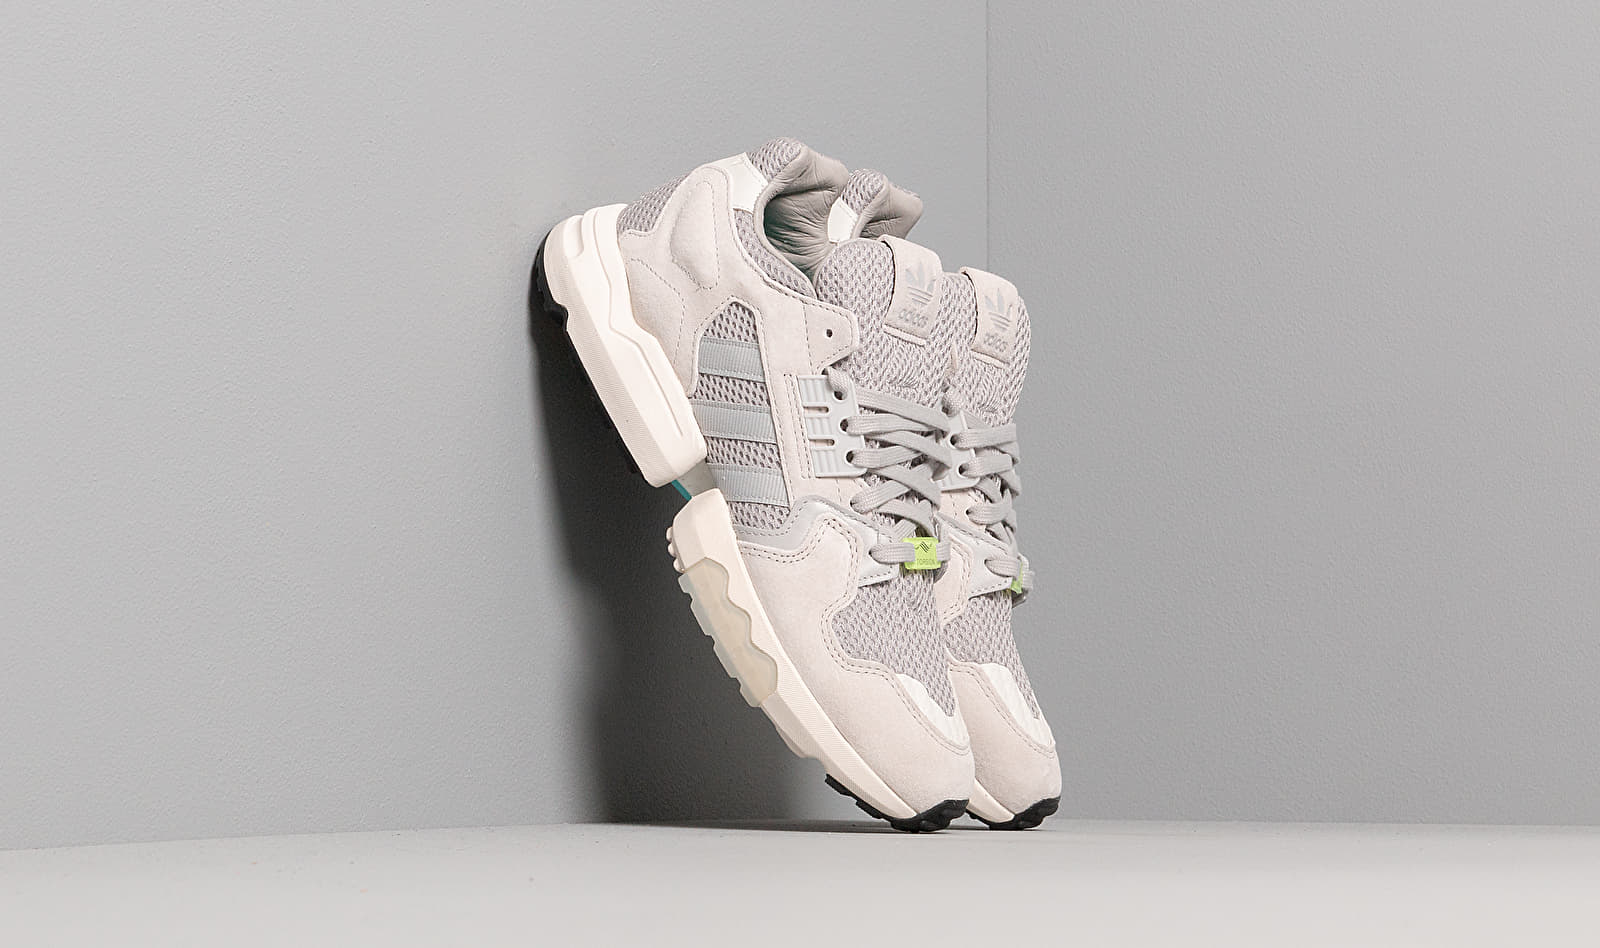 adidas ZX Torsion Grey Two/ Grey Two/ Core White EE4809